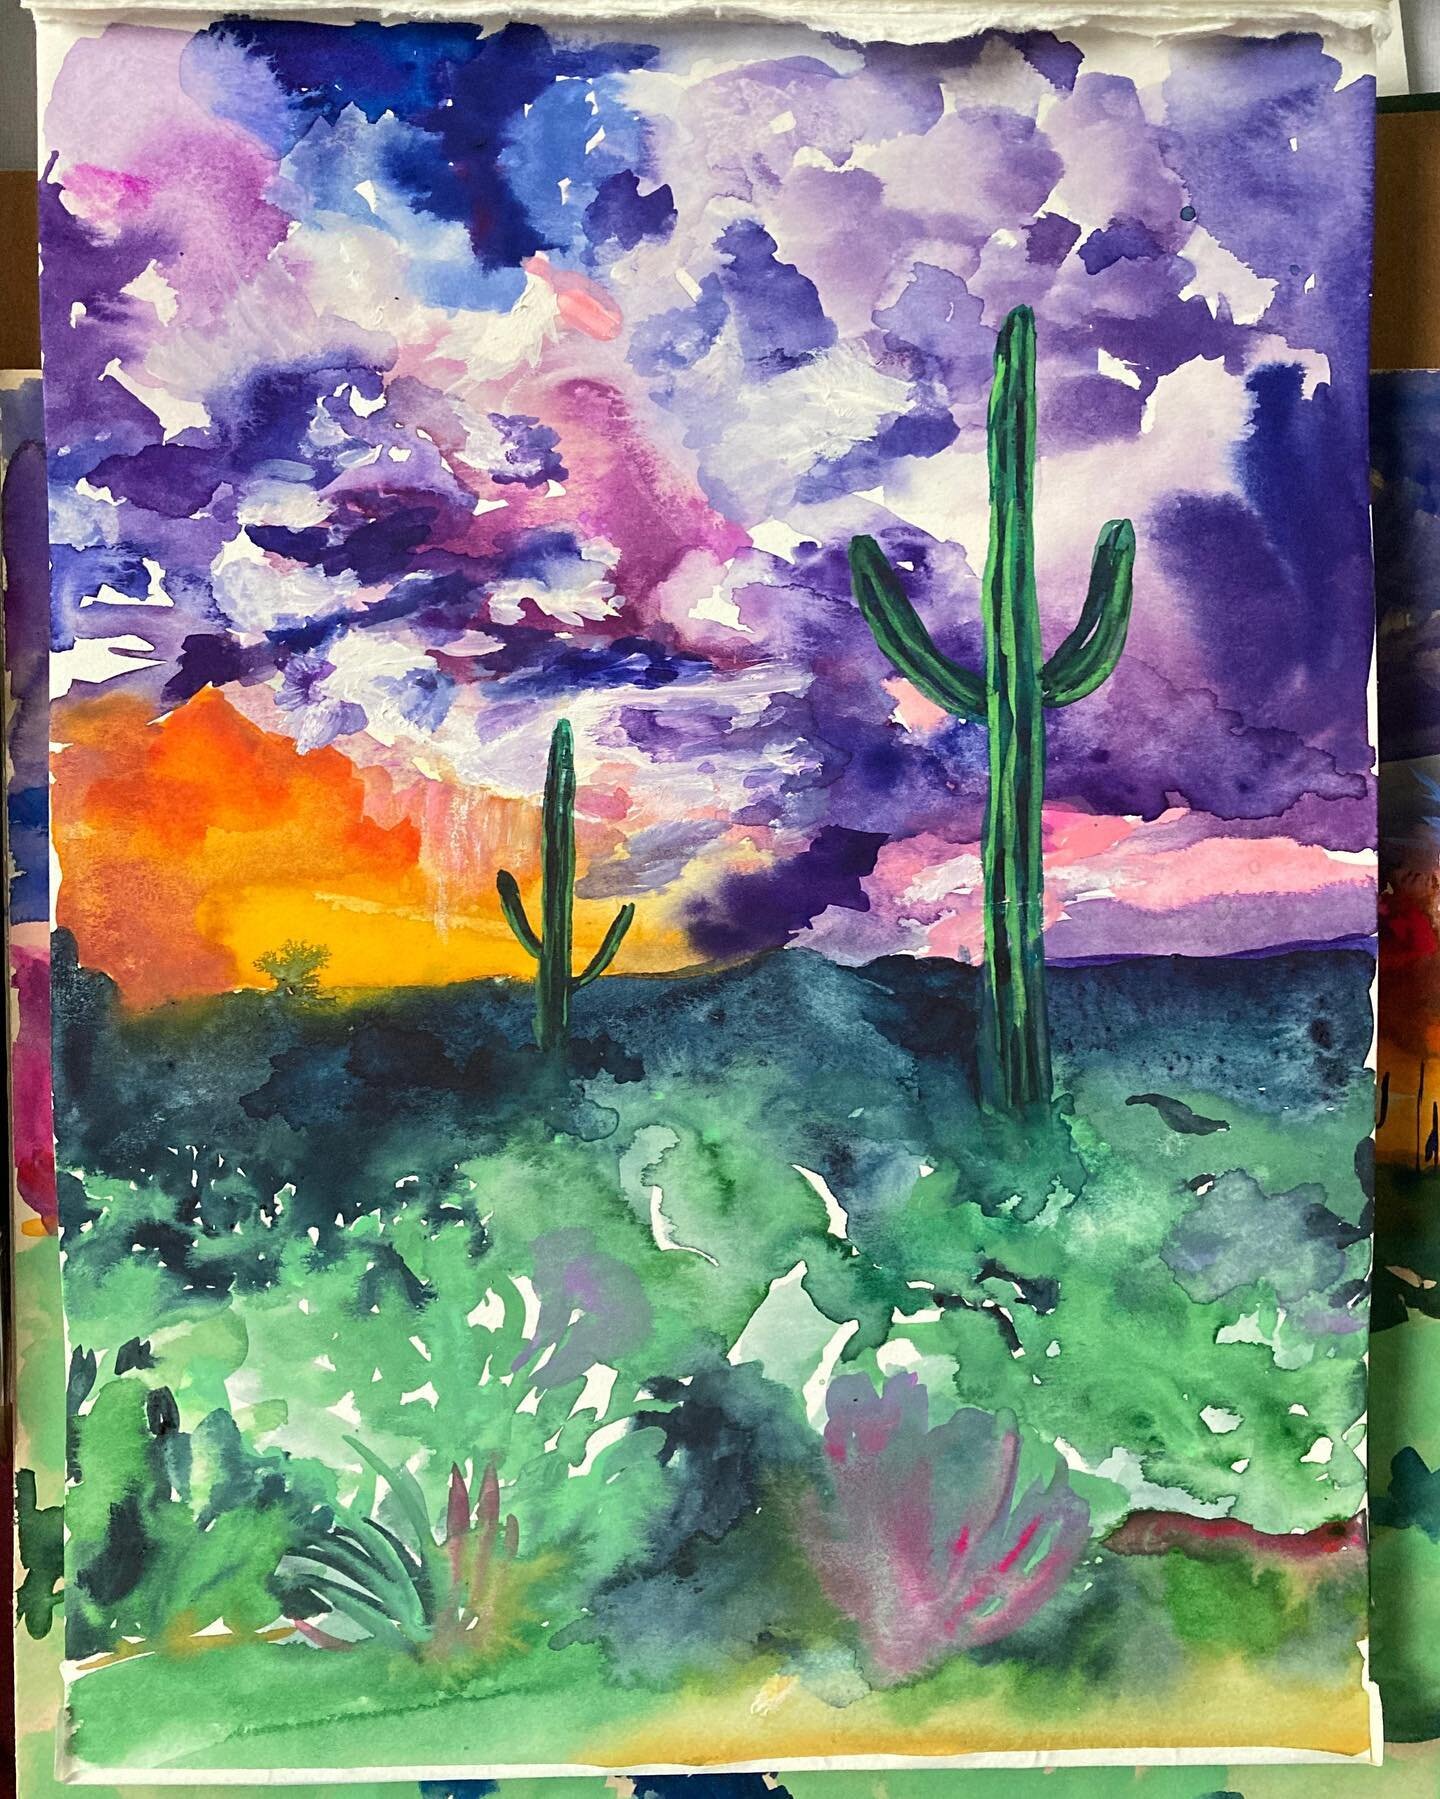 The Arizona summer stormy sky inspired me last night to paint 🎨 
I used @turnercolourworks and some white @lukasfarben acrylic to accent the sky.

I feel inspired to paint again today, which is wonderful since I have been in a slump.

You can force 